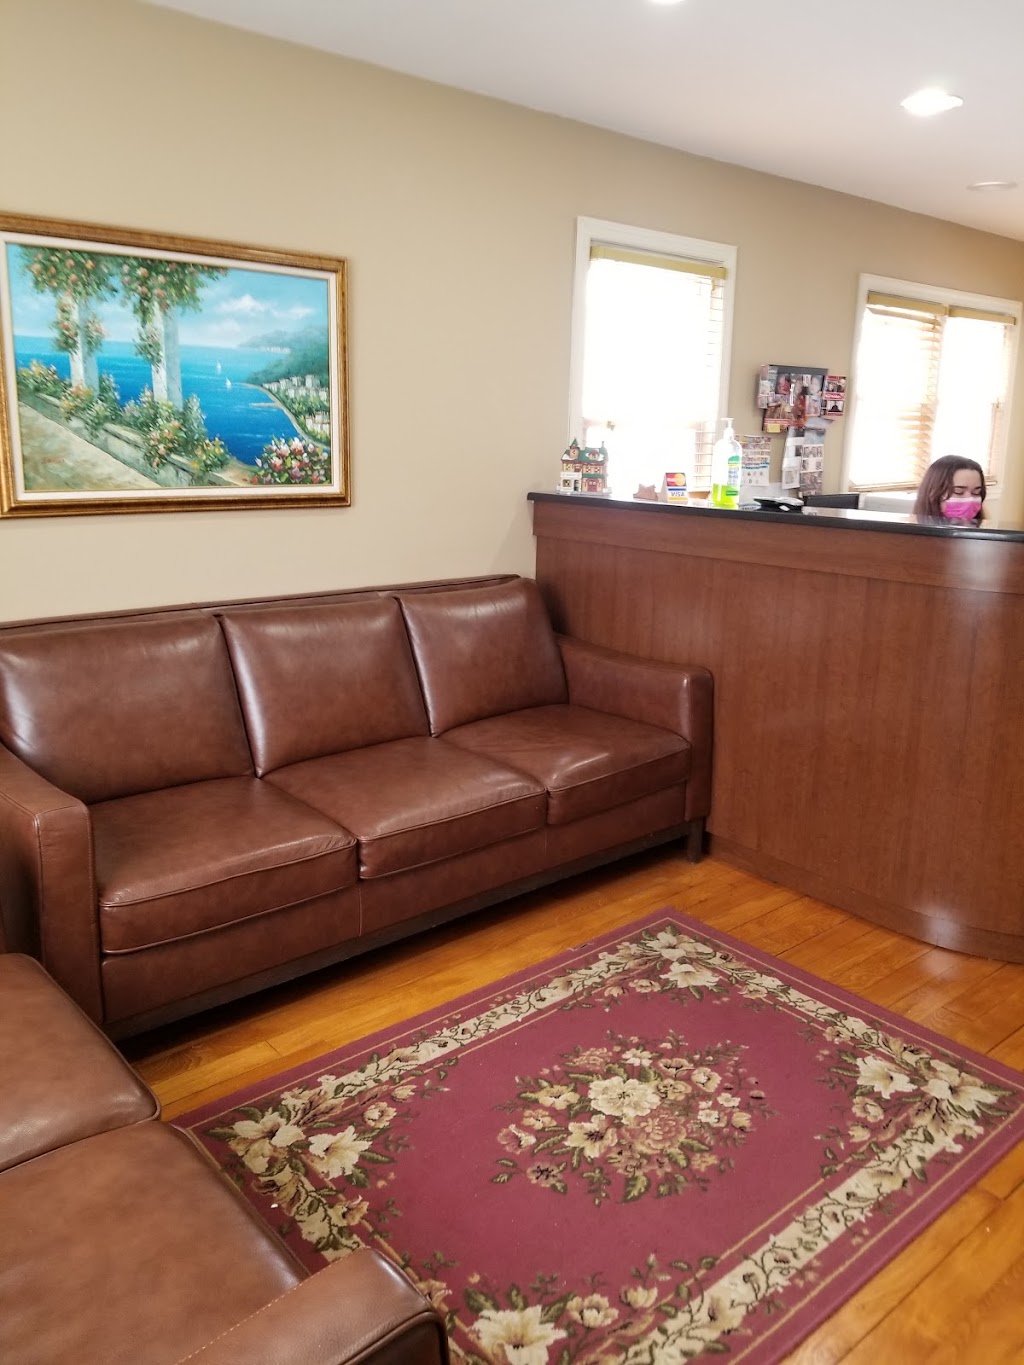 Dr. Tania H. Saavedra, DDS | 185 N Wantagh Ave, Levittown, NY 11756 | Phone: (516) 622-9394